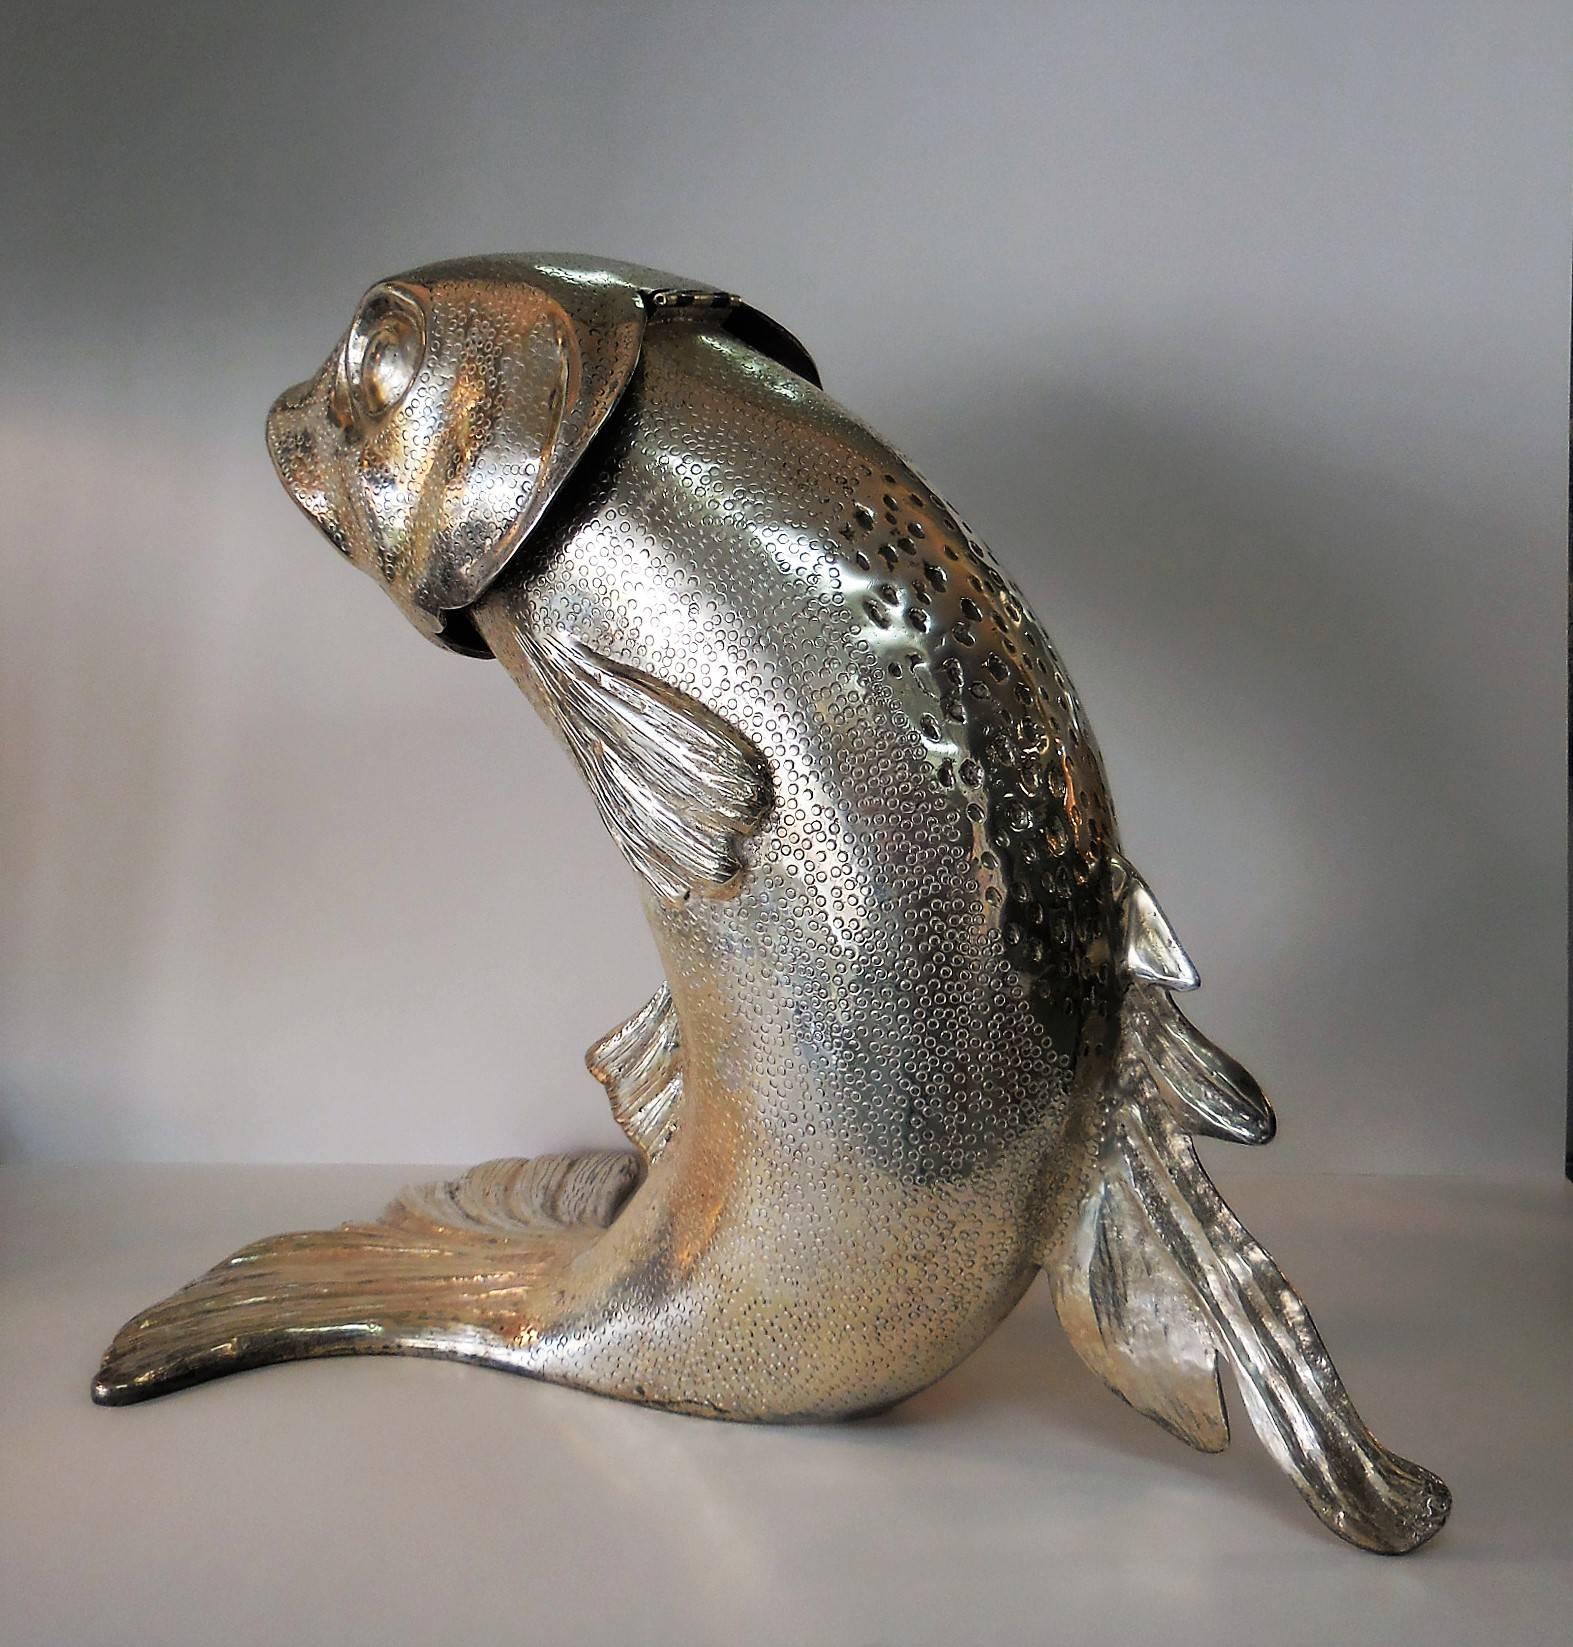 Silver plated bronze fish of monumental size, the head is hinged and reveals a removable bucket. Nice detail and stunning to say the least.